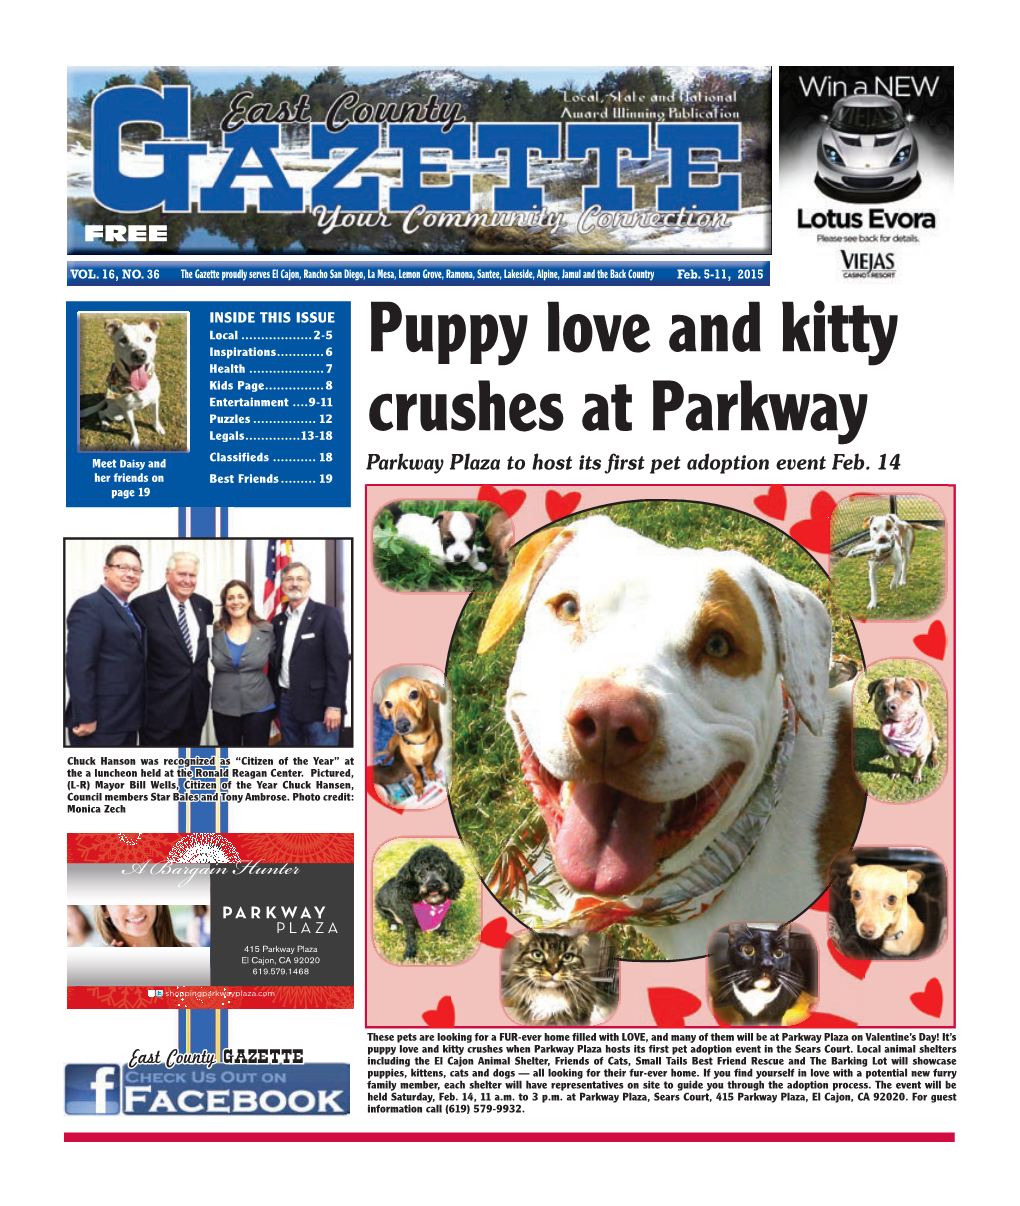 Puppy Love and Kitty Crushes at Parkway